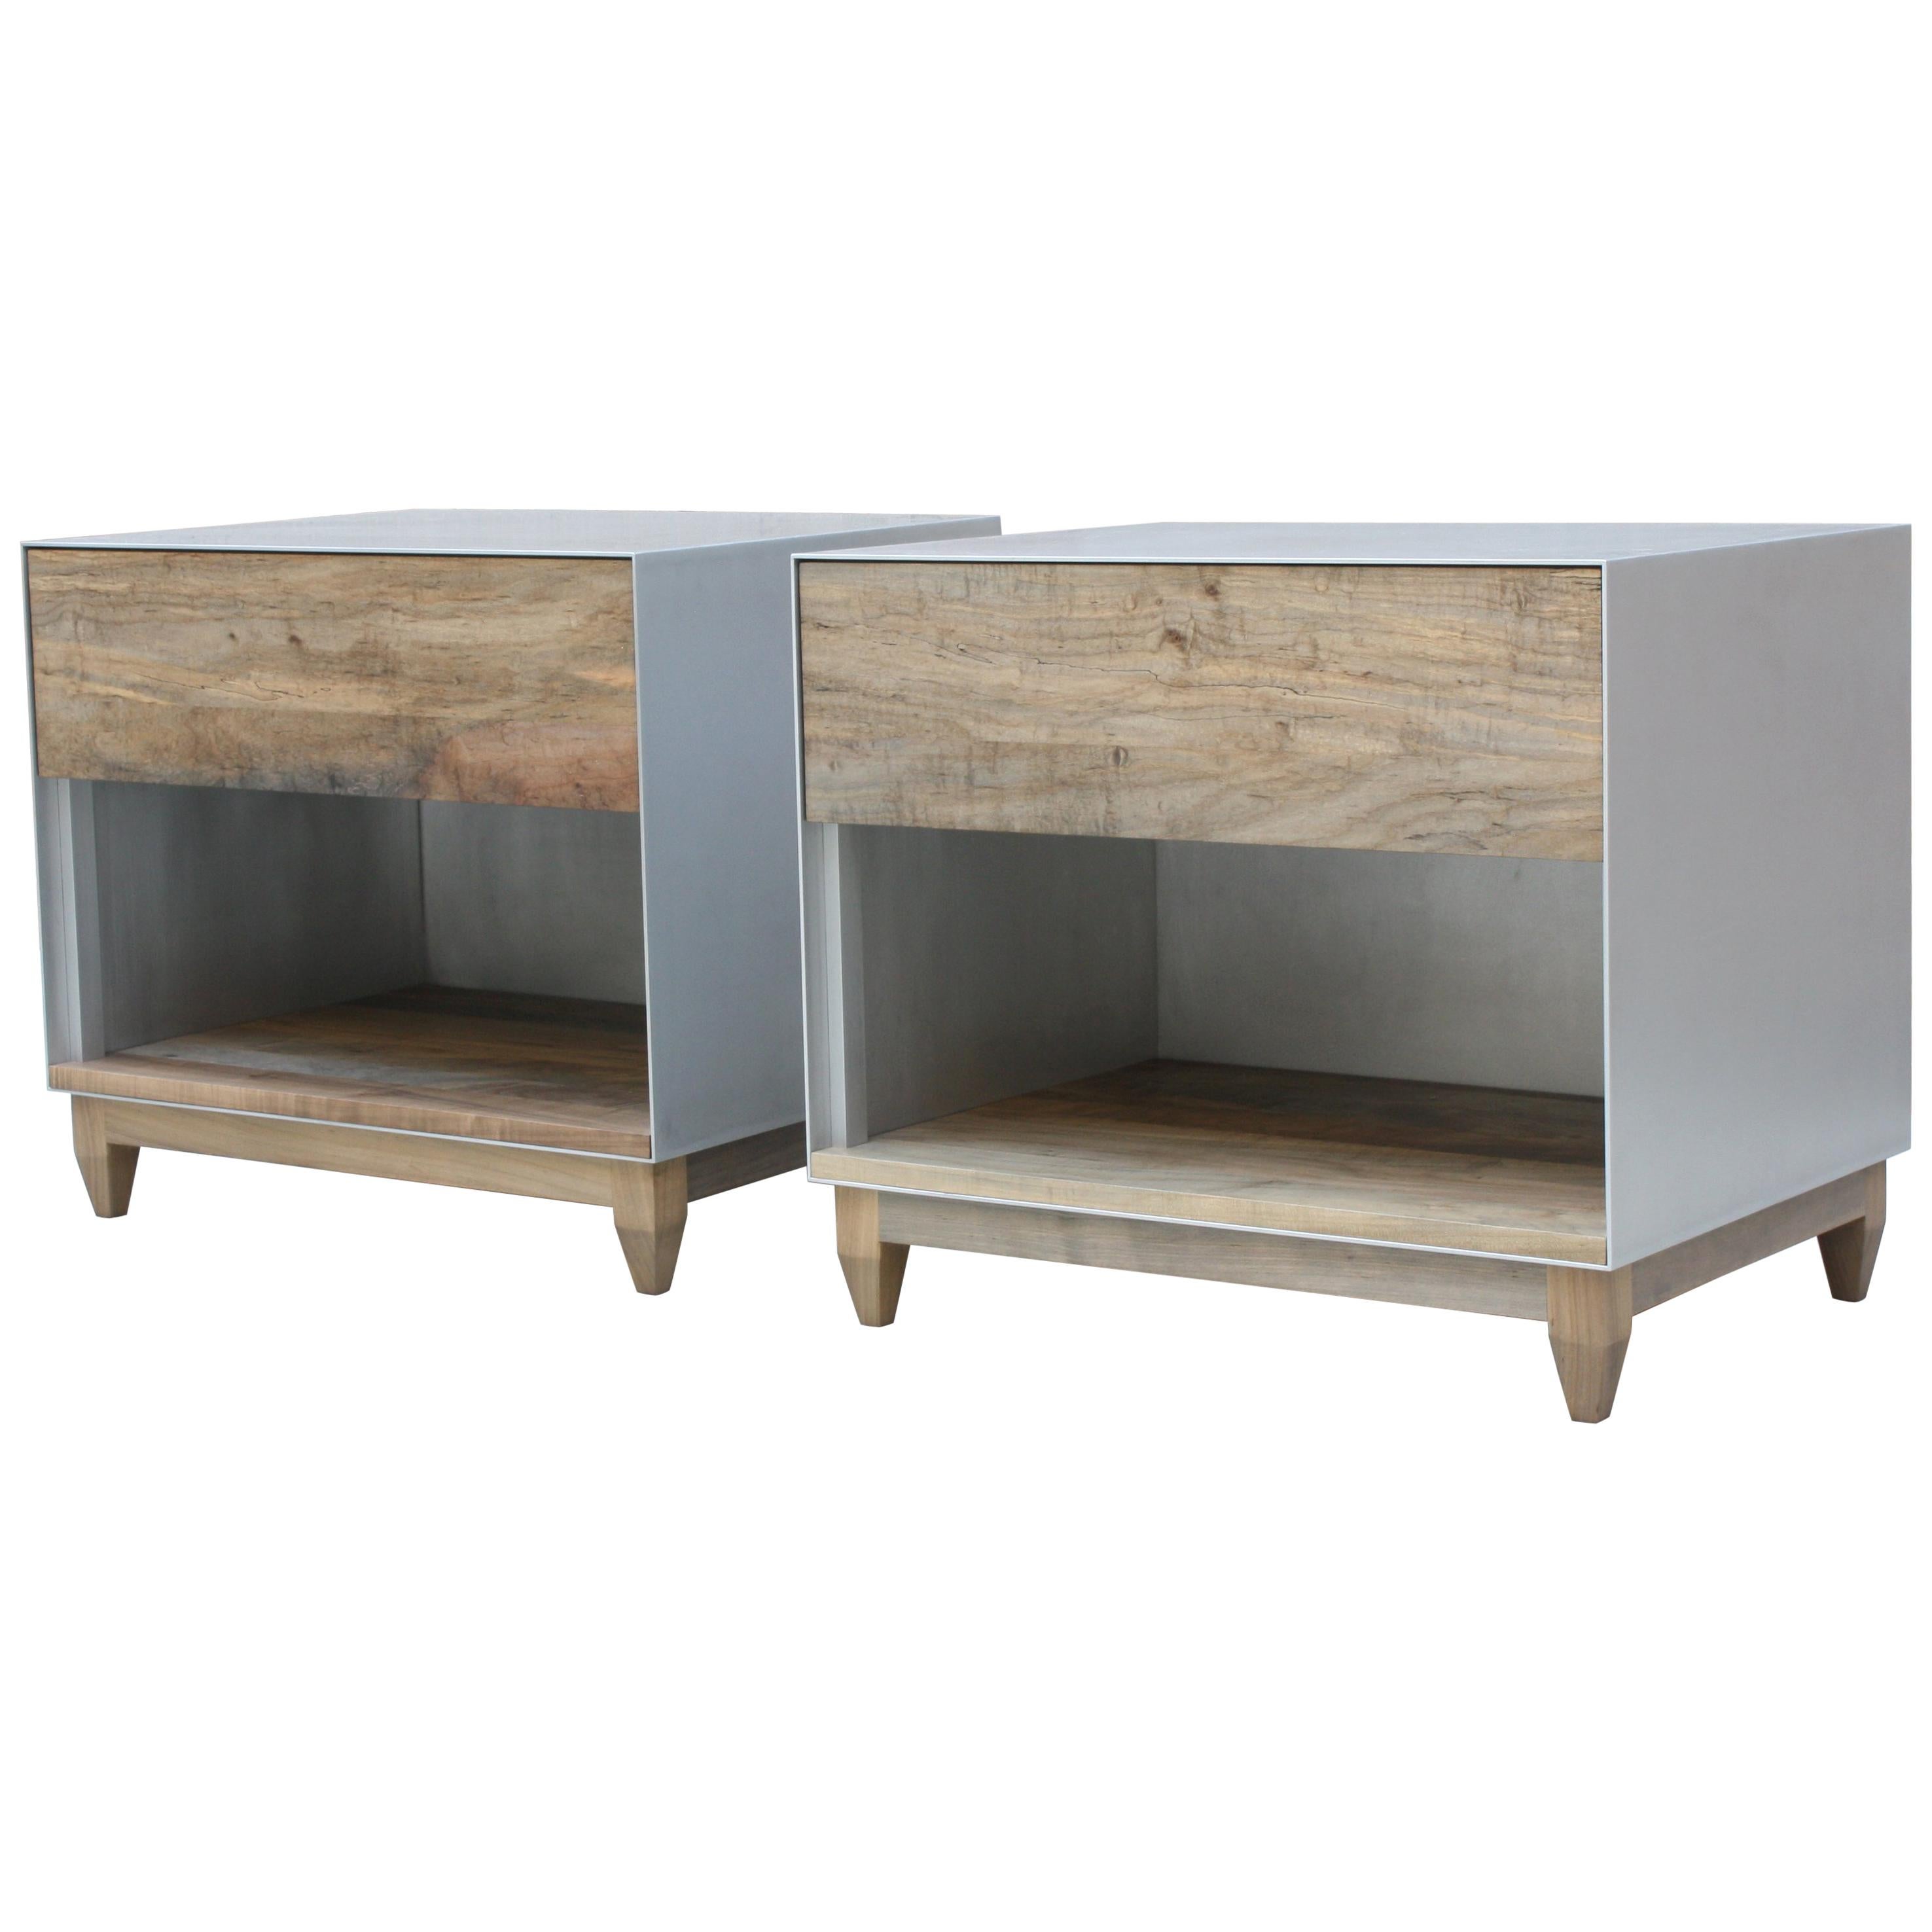 Oxide, Aluminum Side Cabinets with Wood Drawers by Laylo Studio im Angebot